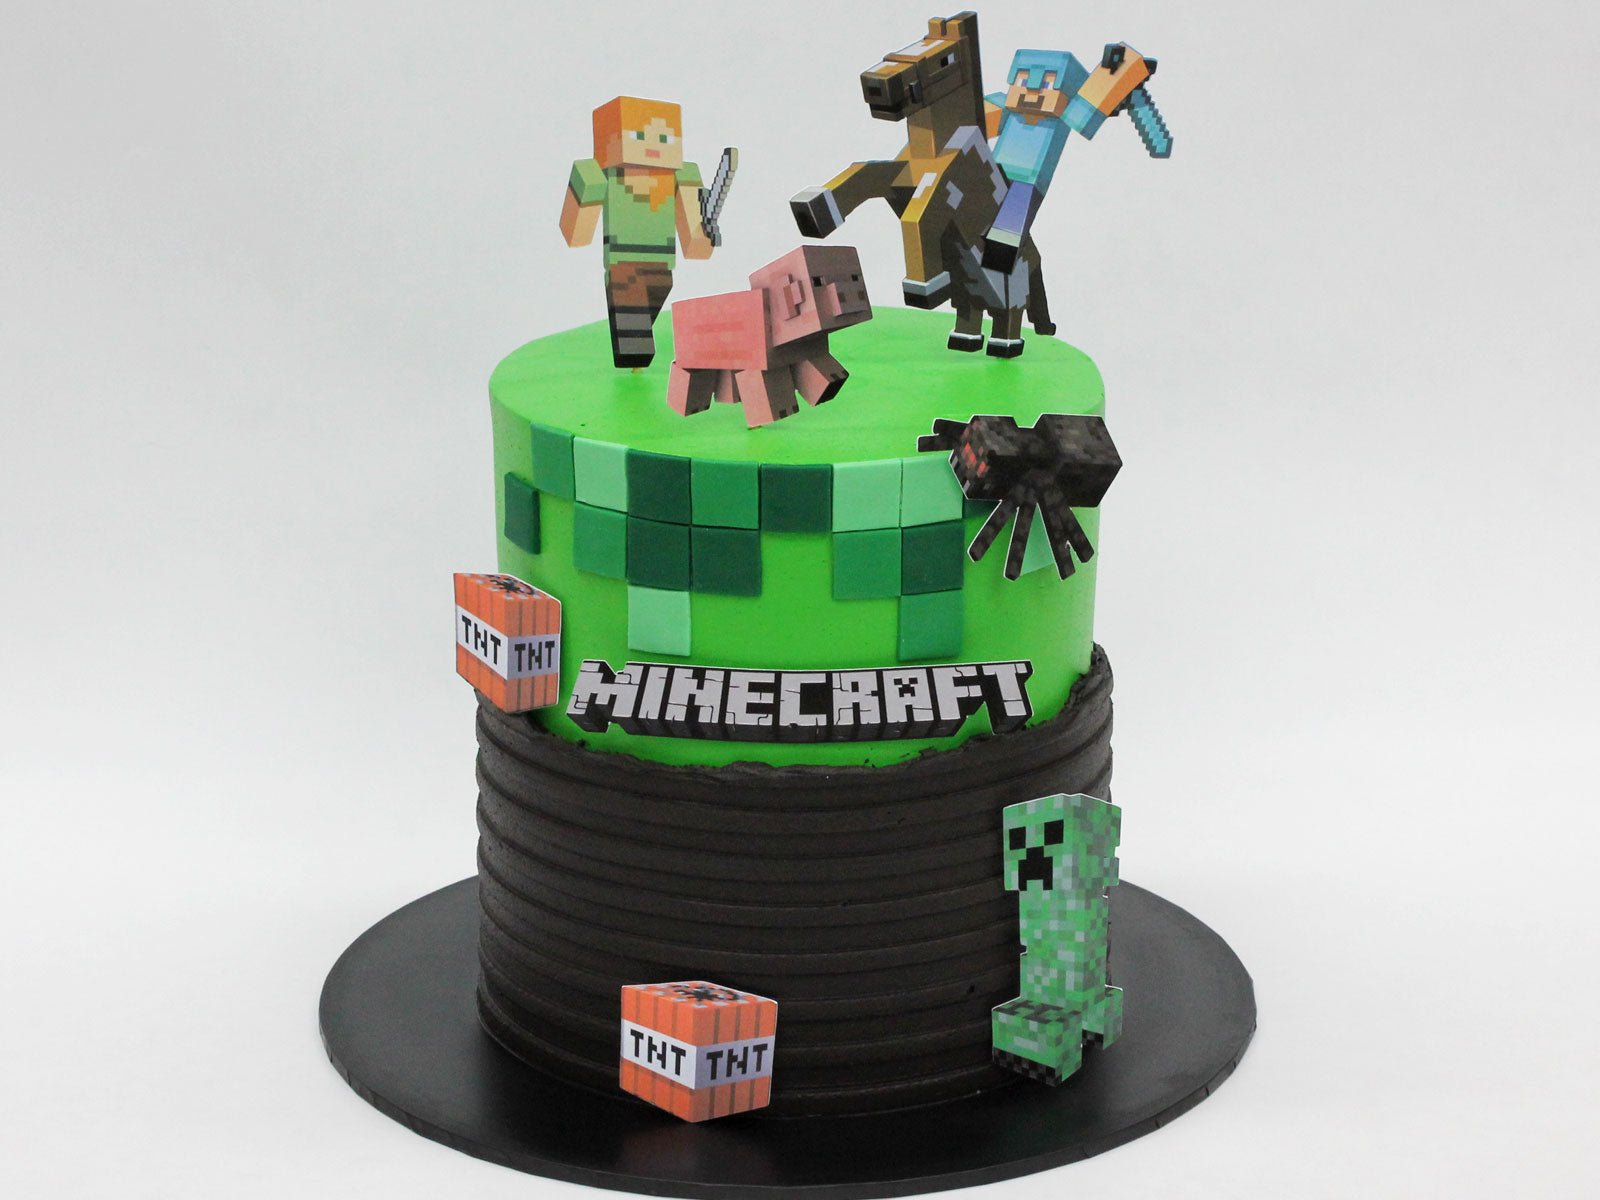 Minecraft Cake | Mini Cakes| Delicious Cake Delivery in KL & Selangor |  Artisan Cakes | French Cakes & Pastry | Designer Cakes | Chocolate Pinata |  Macaron | Flowers & Balloon | Gifts